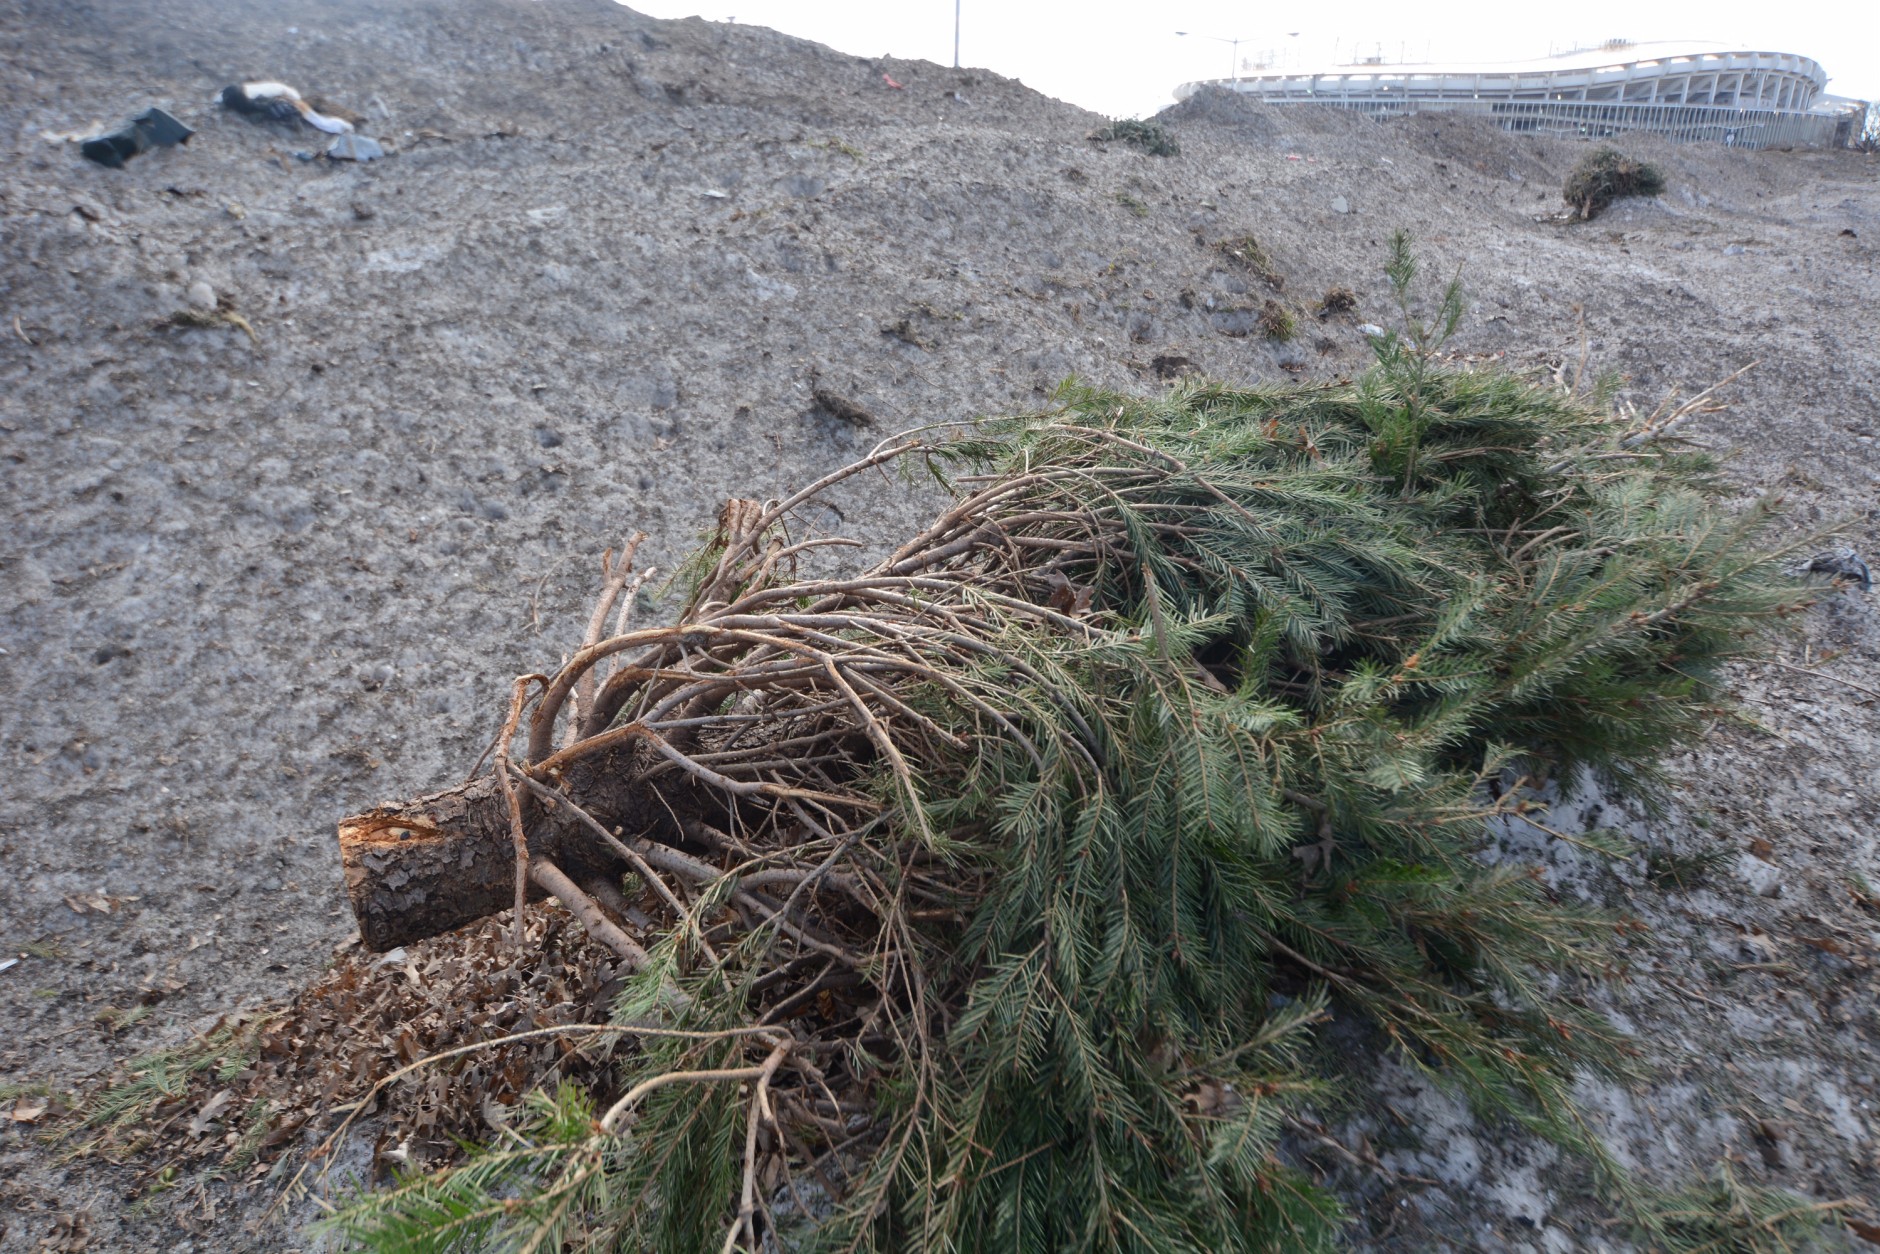 One of the most common forms of debris are Christmas trees that were scooped off of curbs along with nearly 2,295 lane miles of snow. (WTOP/Dave Dildine)